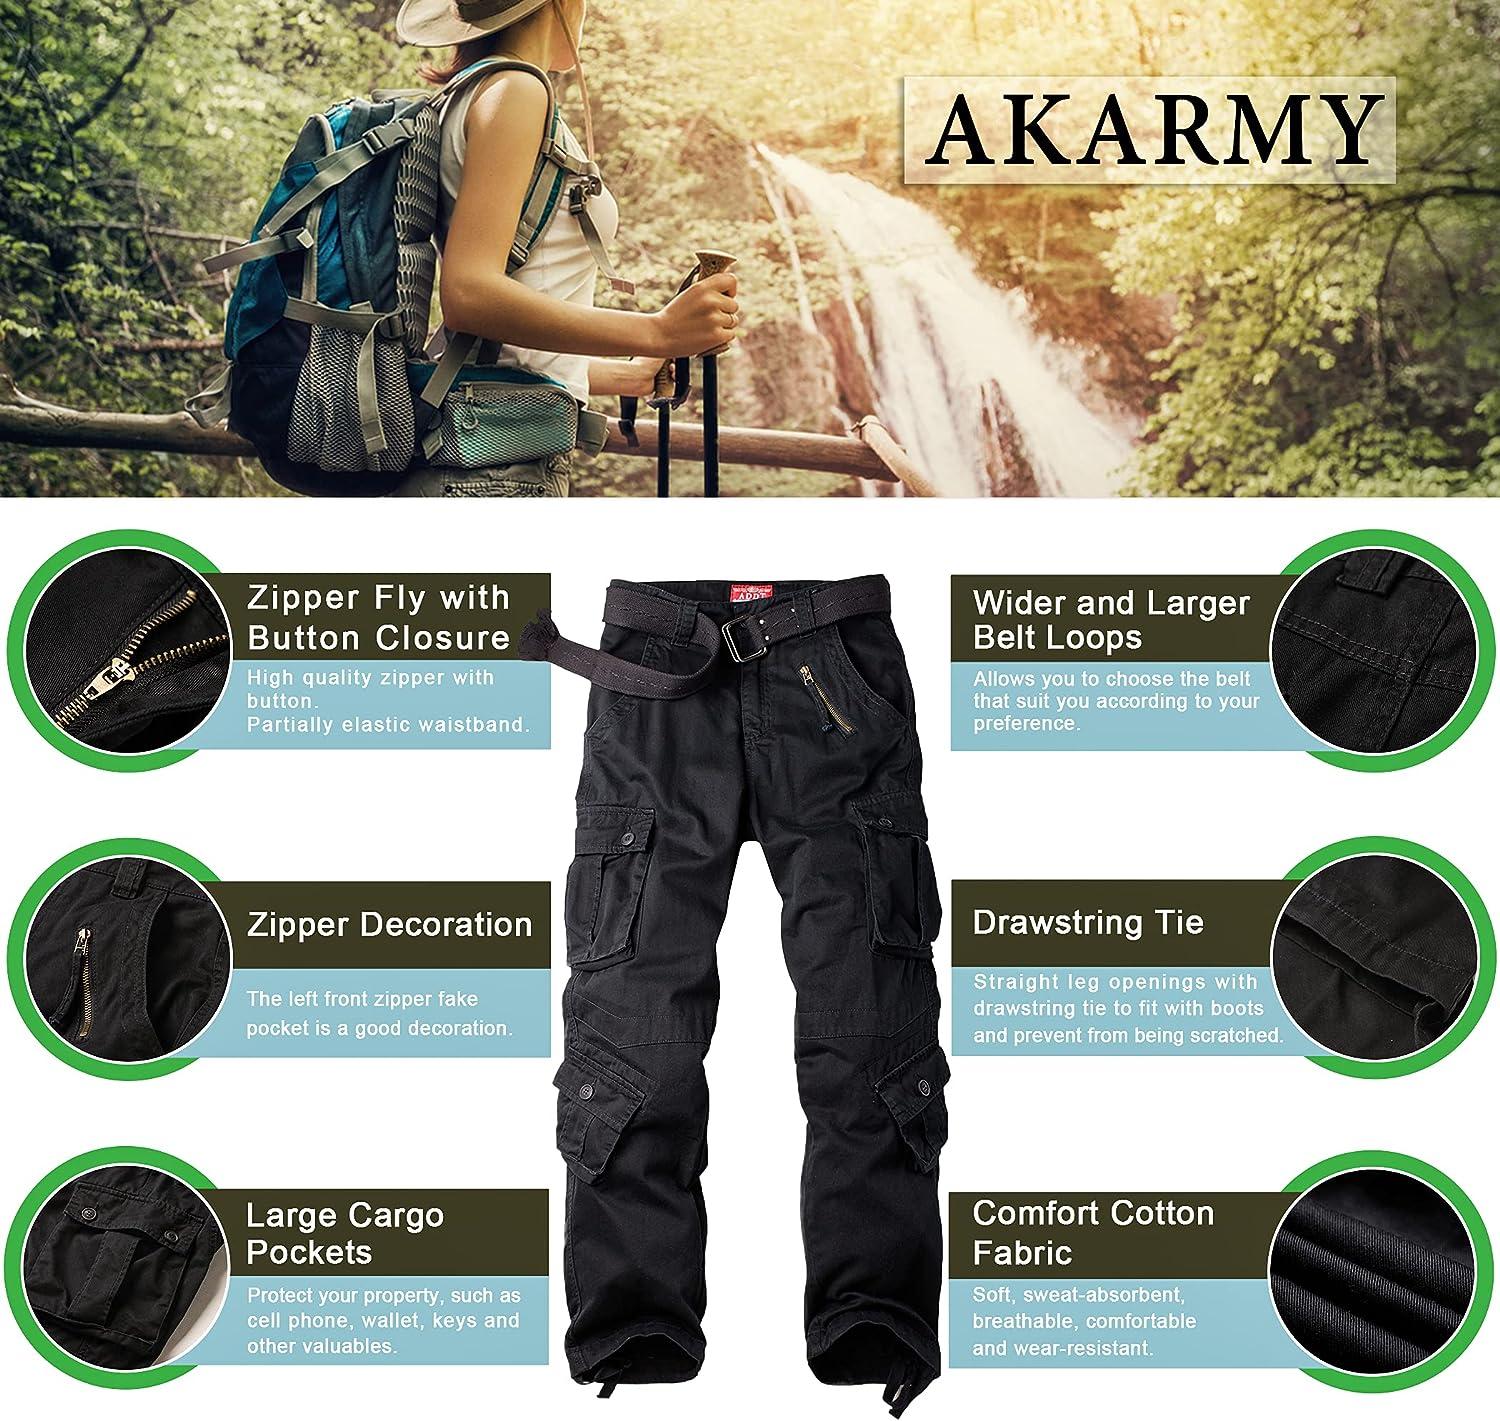  Womens Cargo Pants with Pockets Outdoor Casual Ripstop